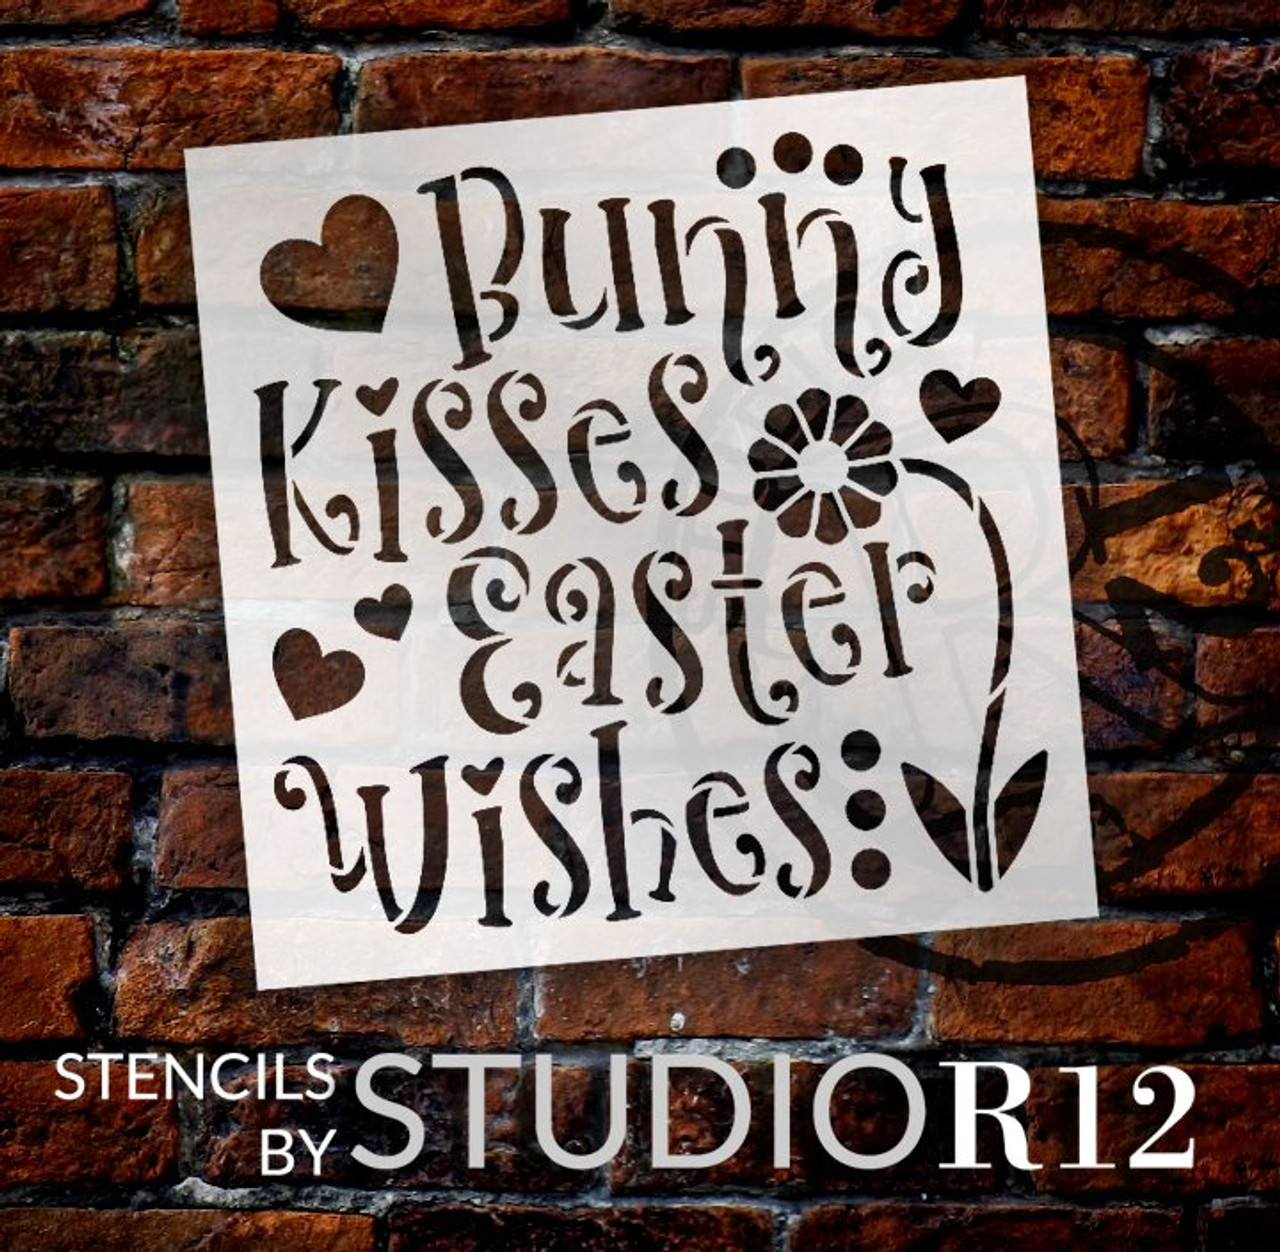 Bunny Kisses Easter Wishes Stencil with Flower & Hearts by StudioR12 | DIY Farmhouse Spring Home Decor | Paint Wood Signs | Select Size